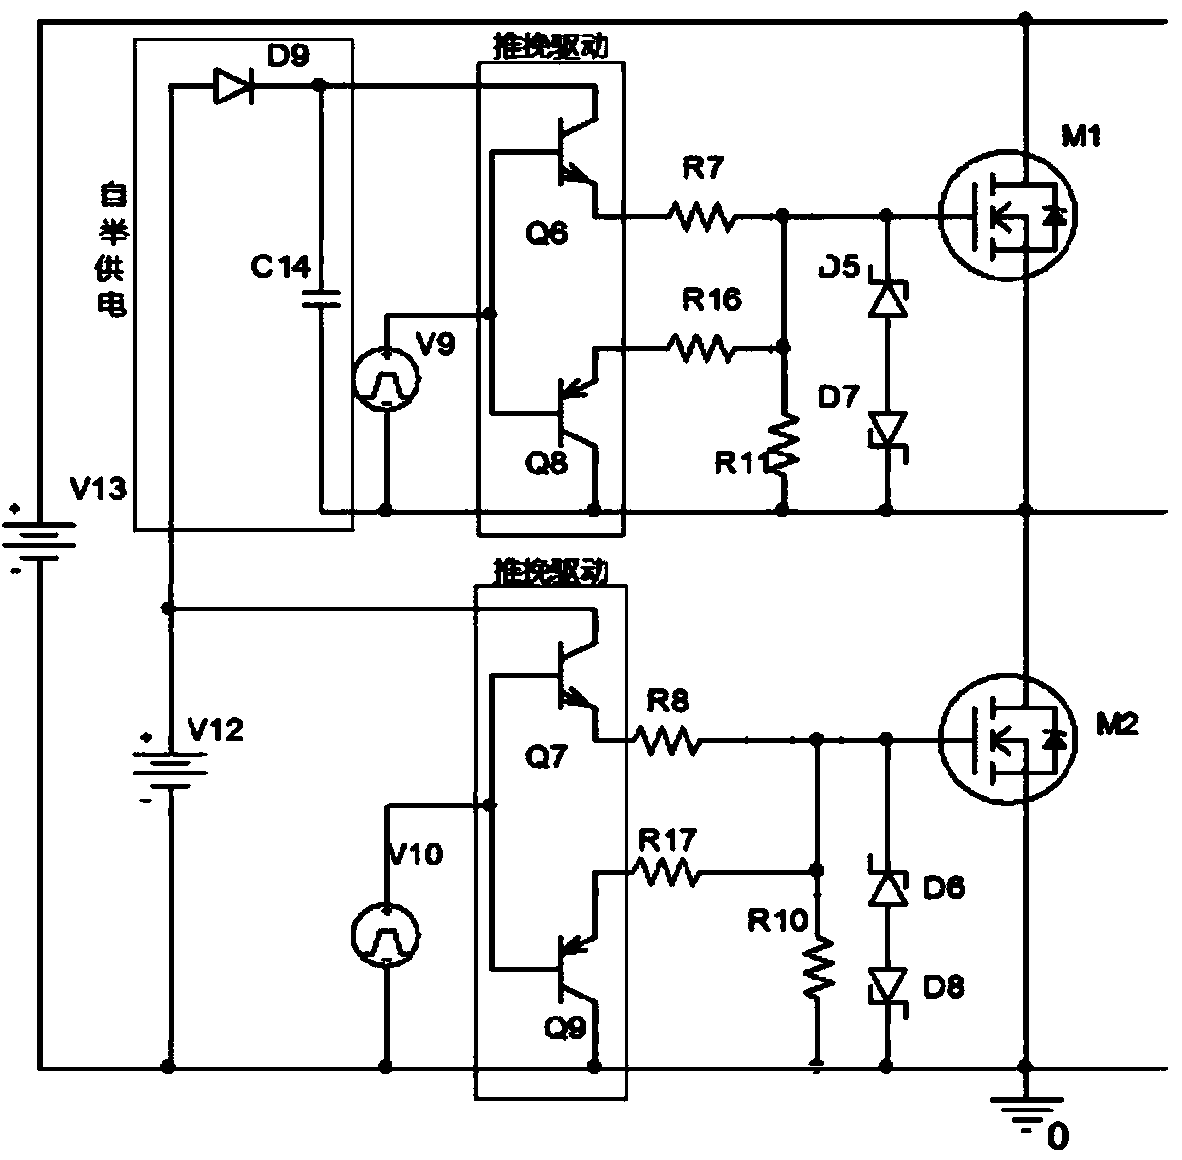 Bootstrap power-supply MOSFET/IGBT (metal-oxide-semiconductor field effect transistor/insulated gate bipolar translator) driving circuit with high negative voltage